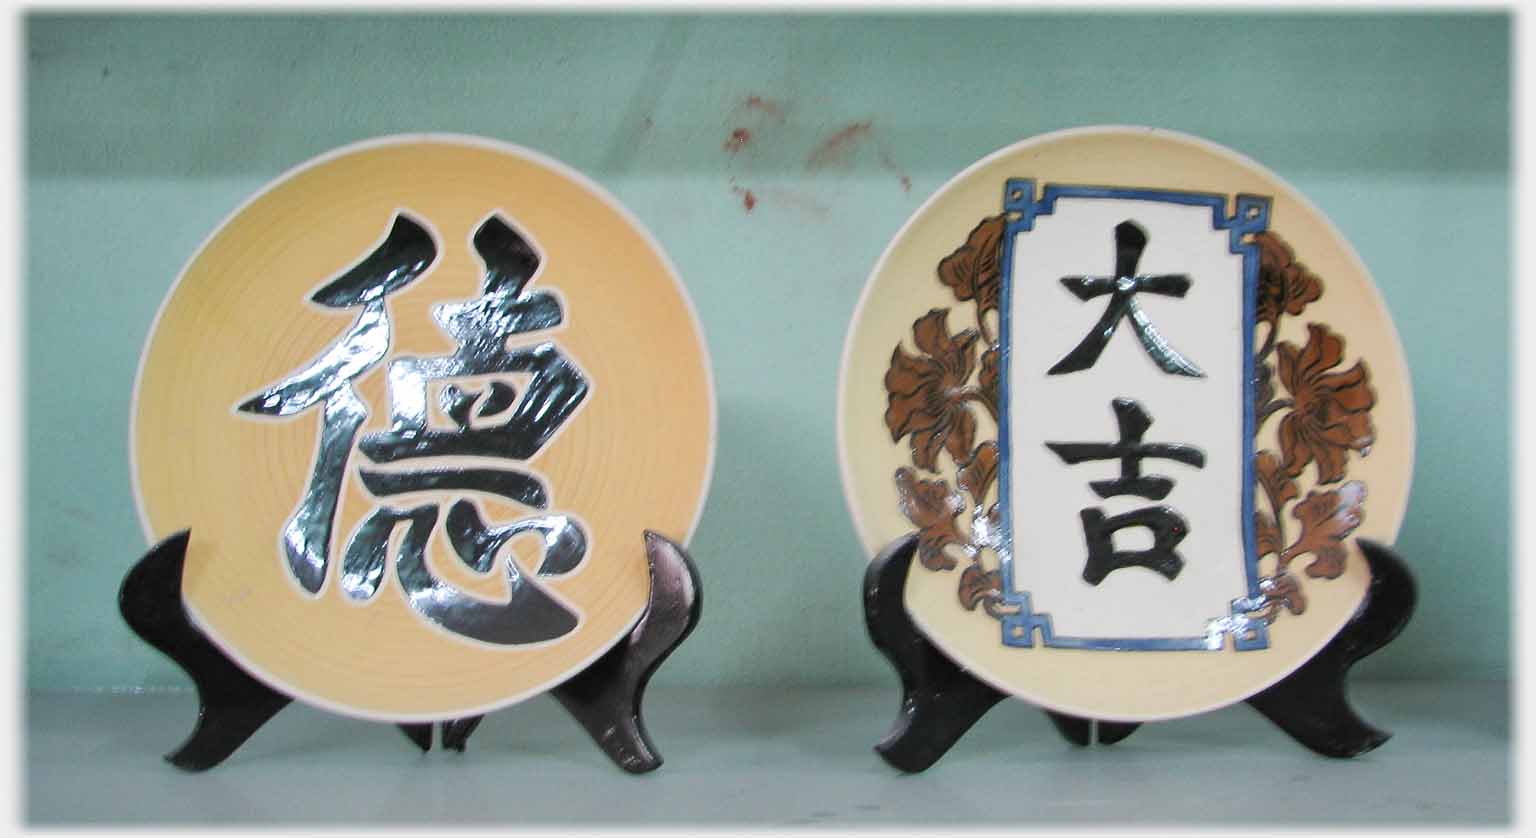 Two plates on stands with large Chinese characters on each.